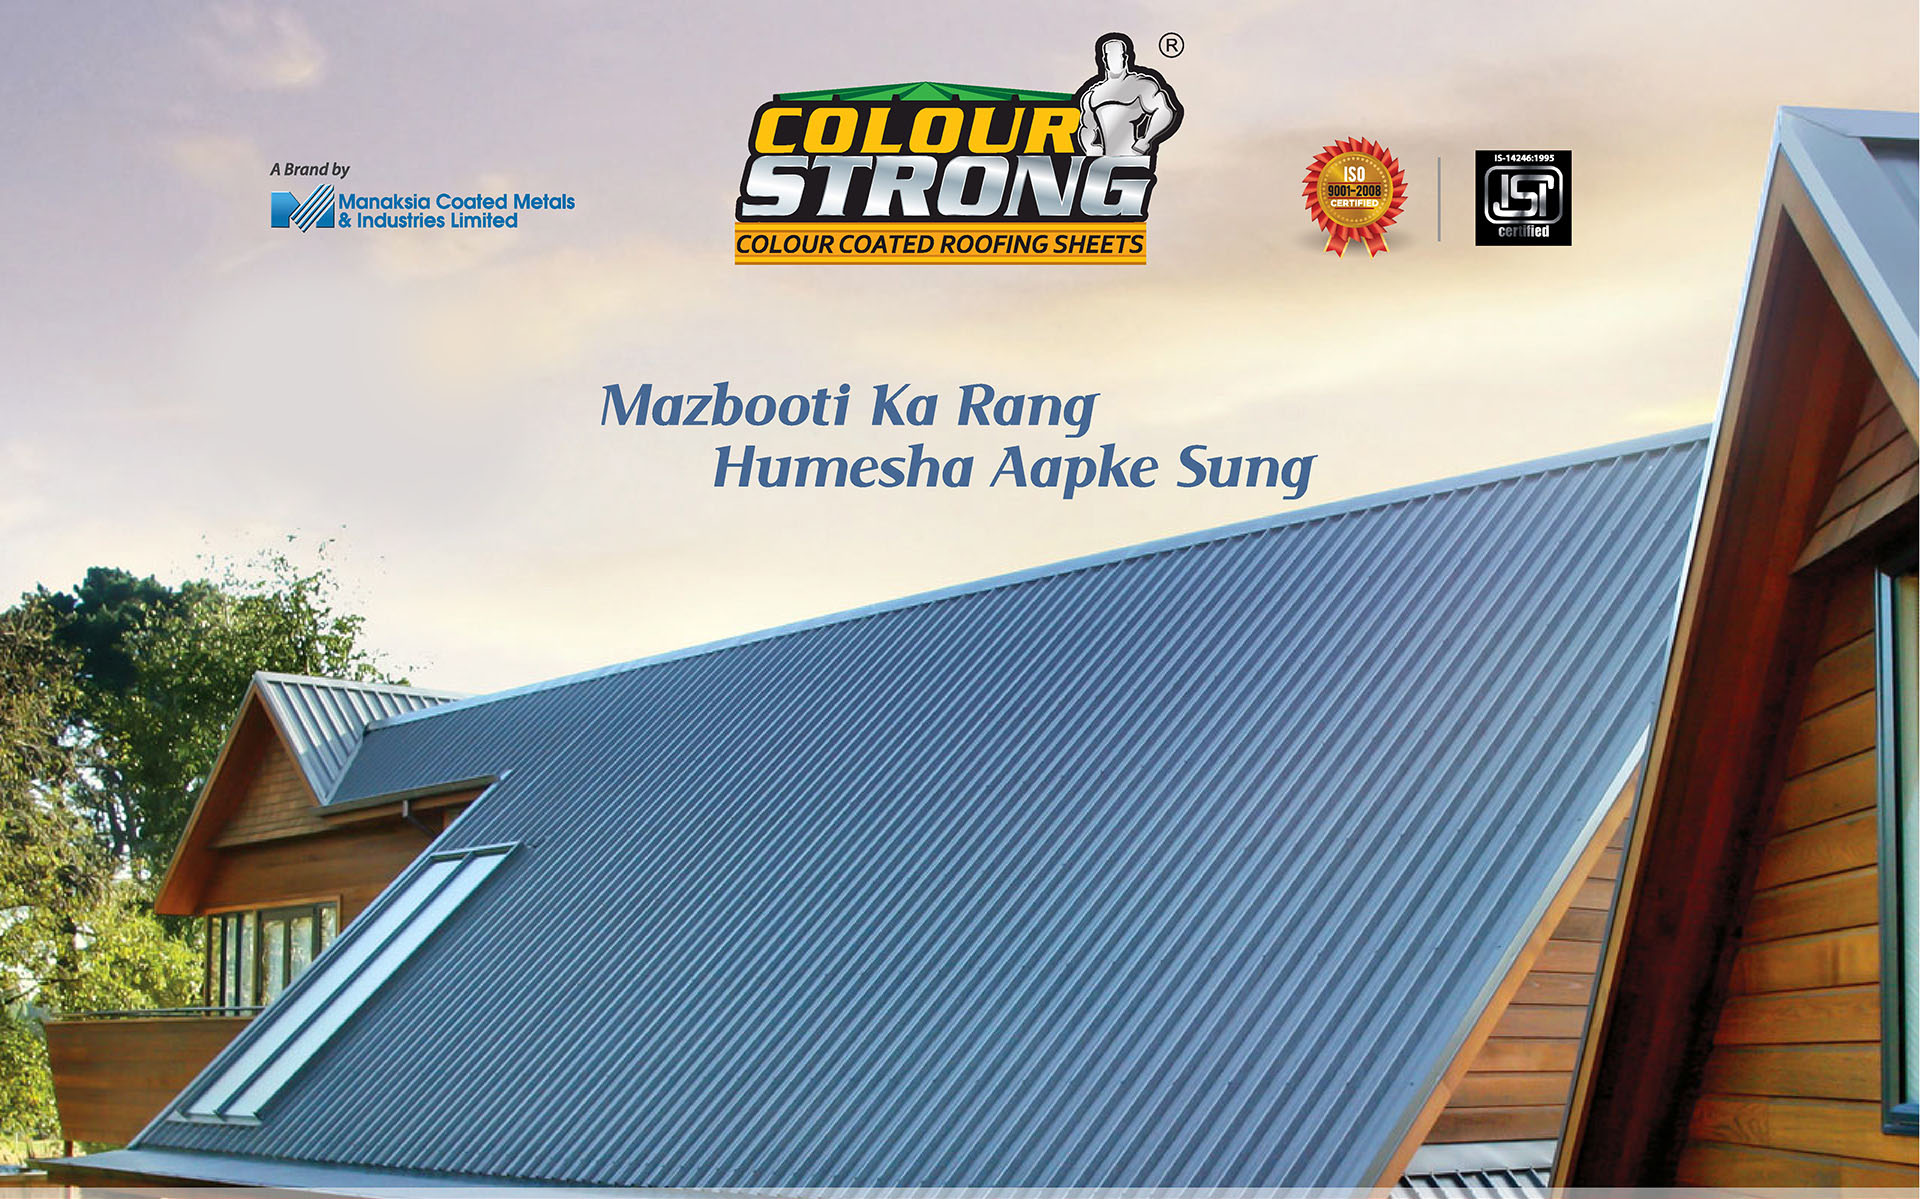 Colour Strong Colour Coated Roofing Sheets